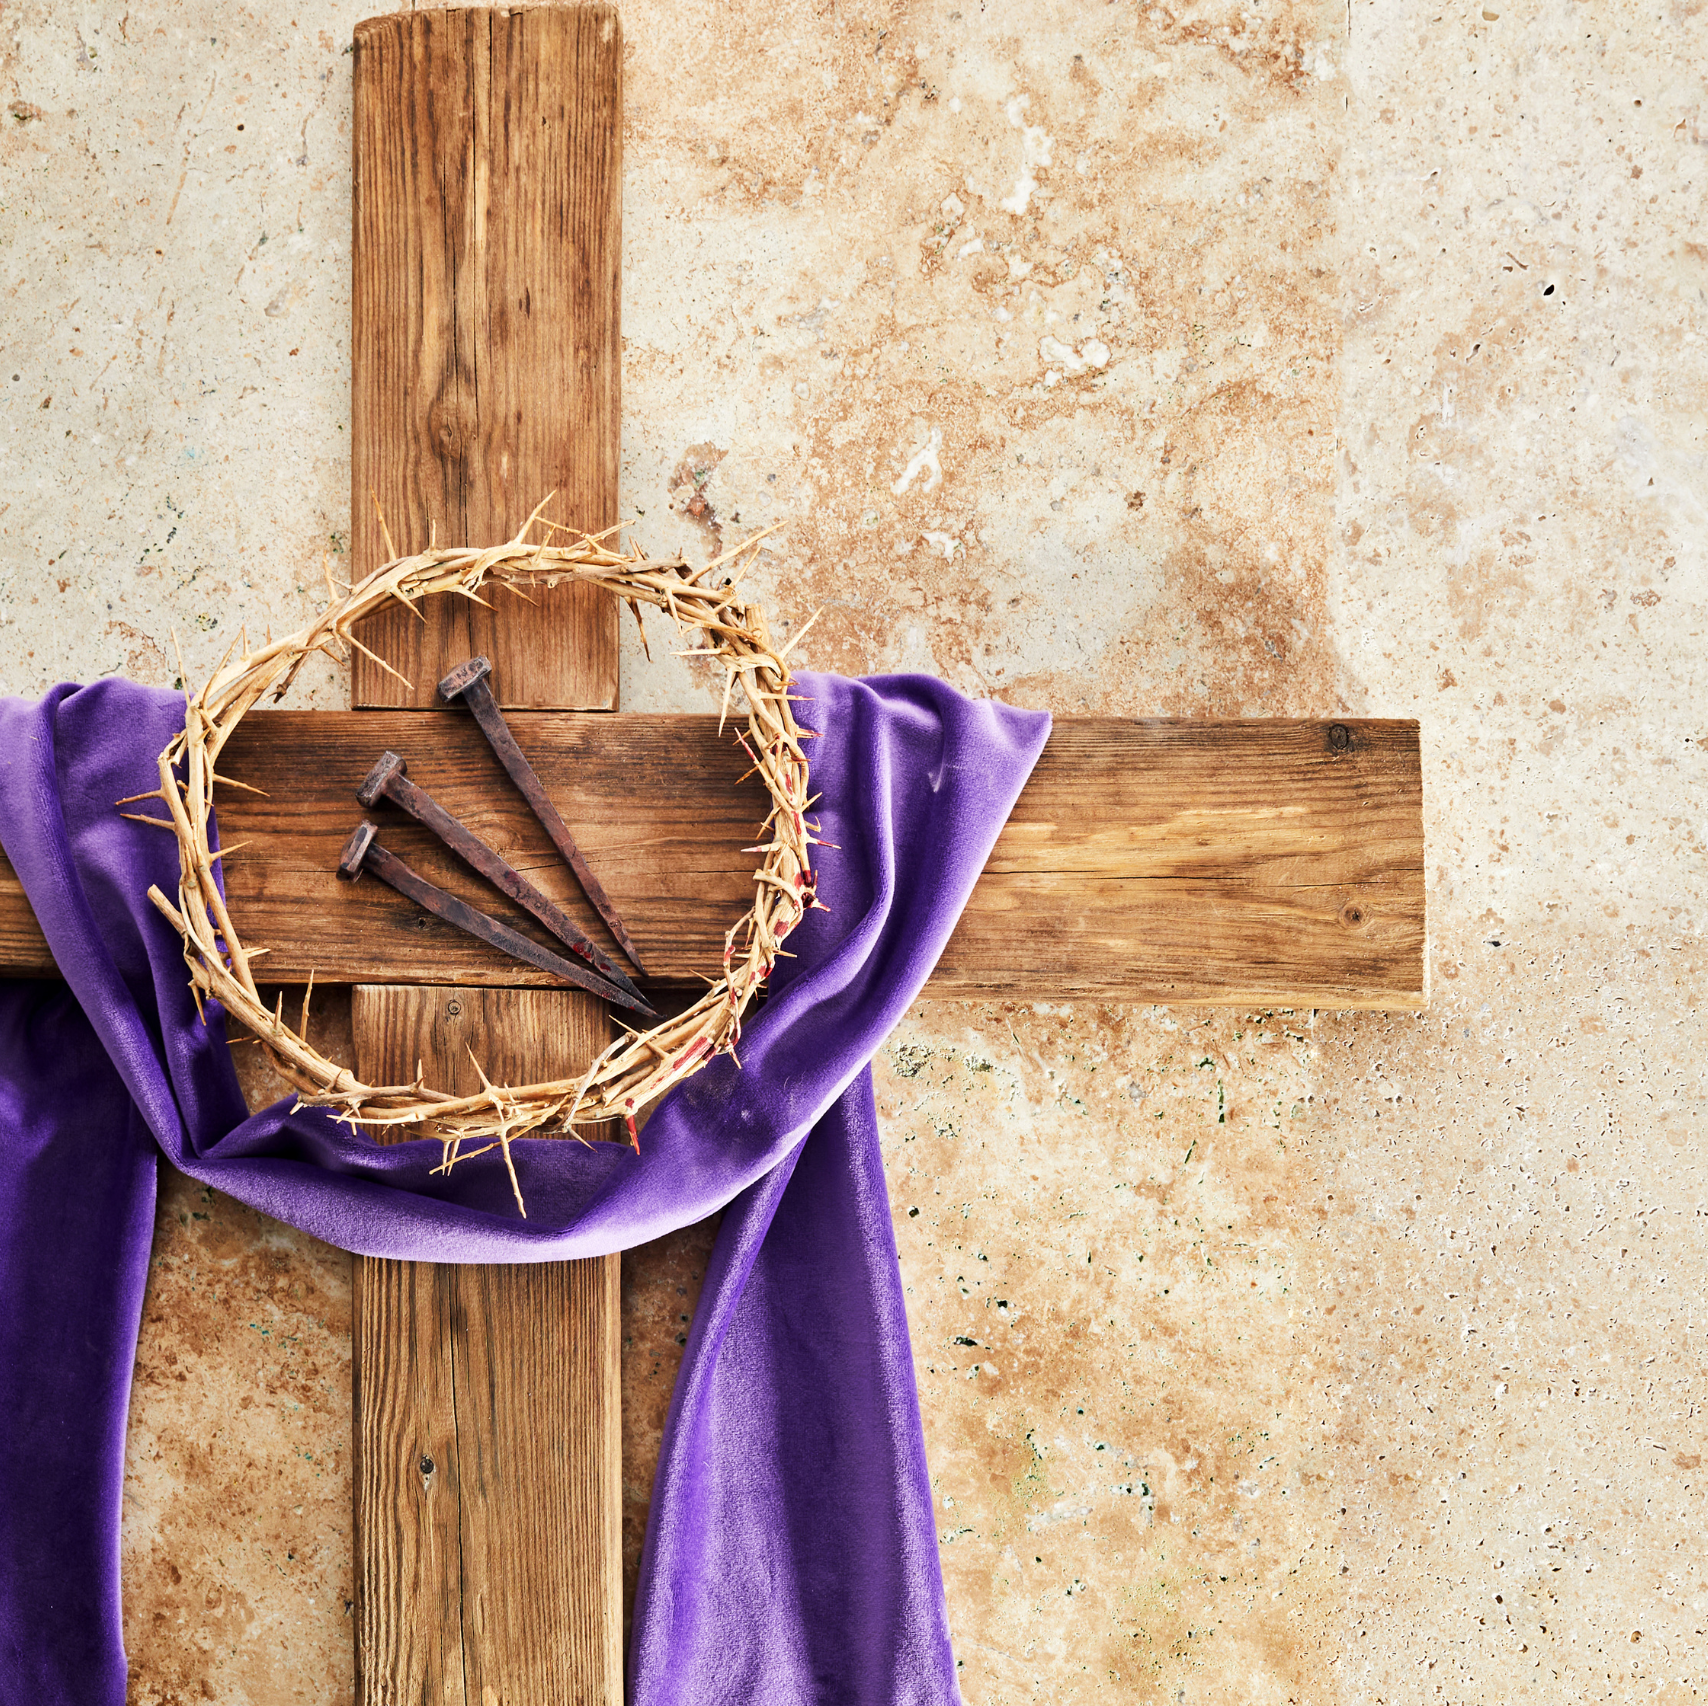 Featured image for “Celebrating Lent as a Catholic Family: 40 Days of Activities Link You to Lent”